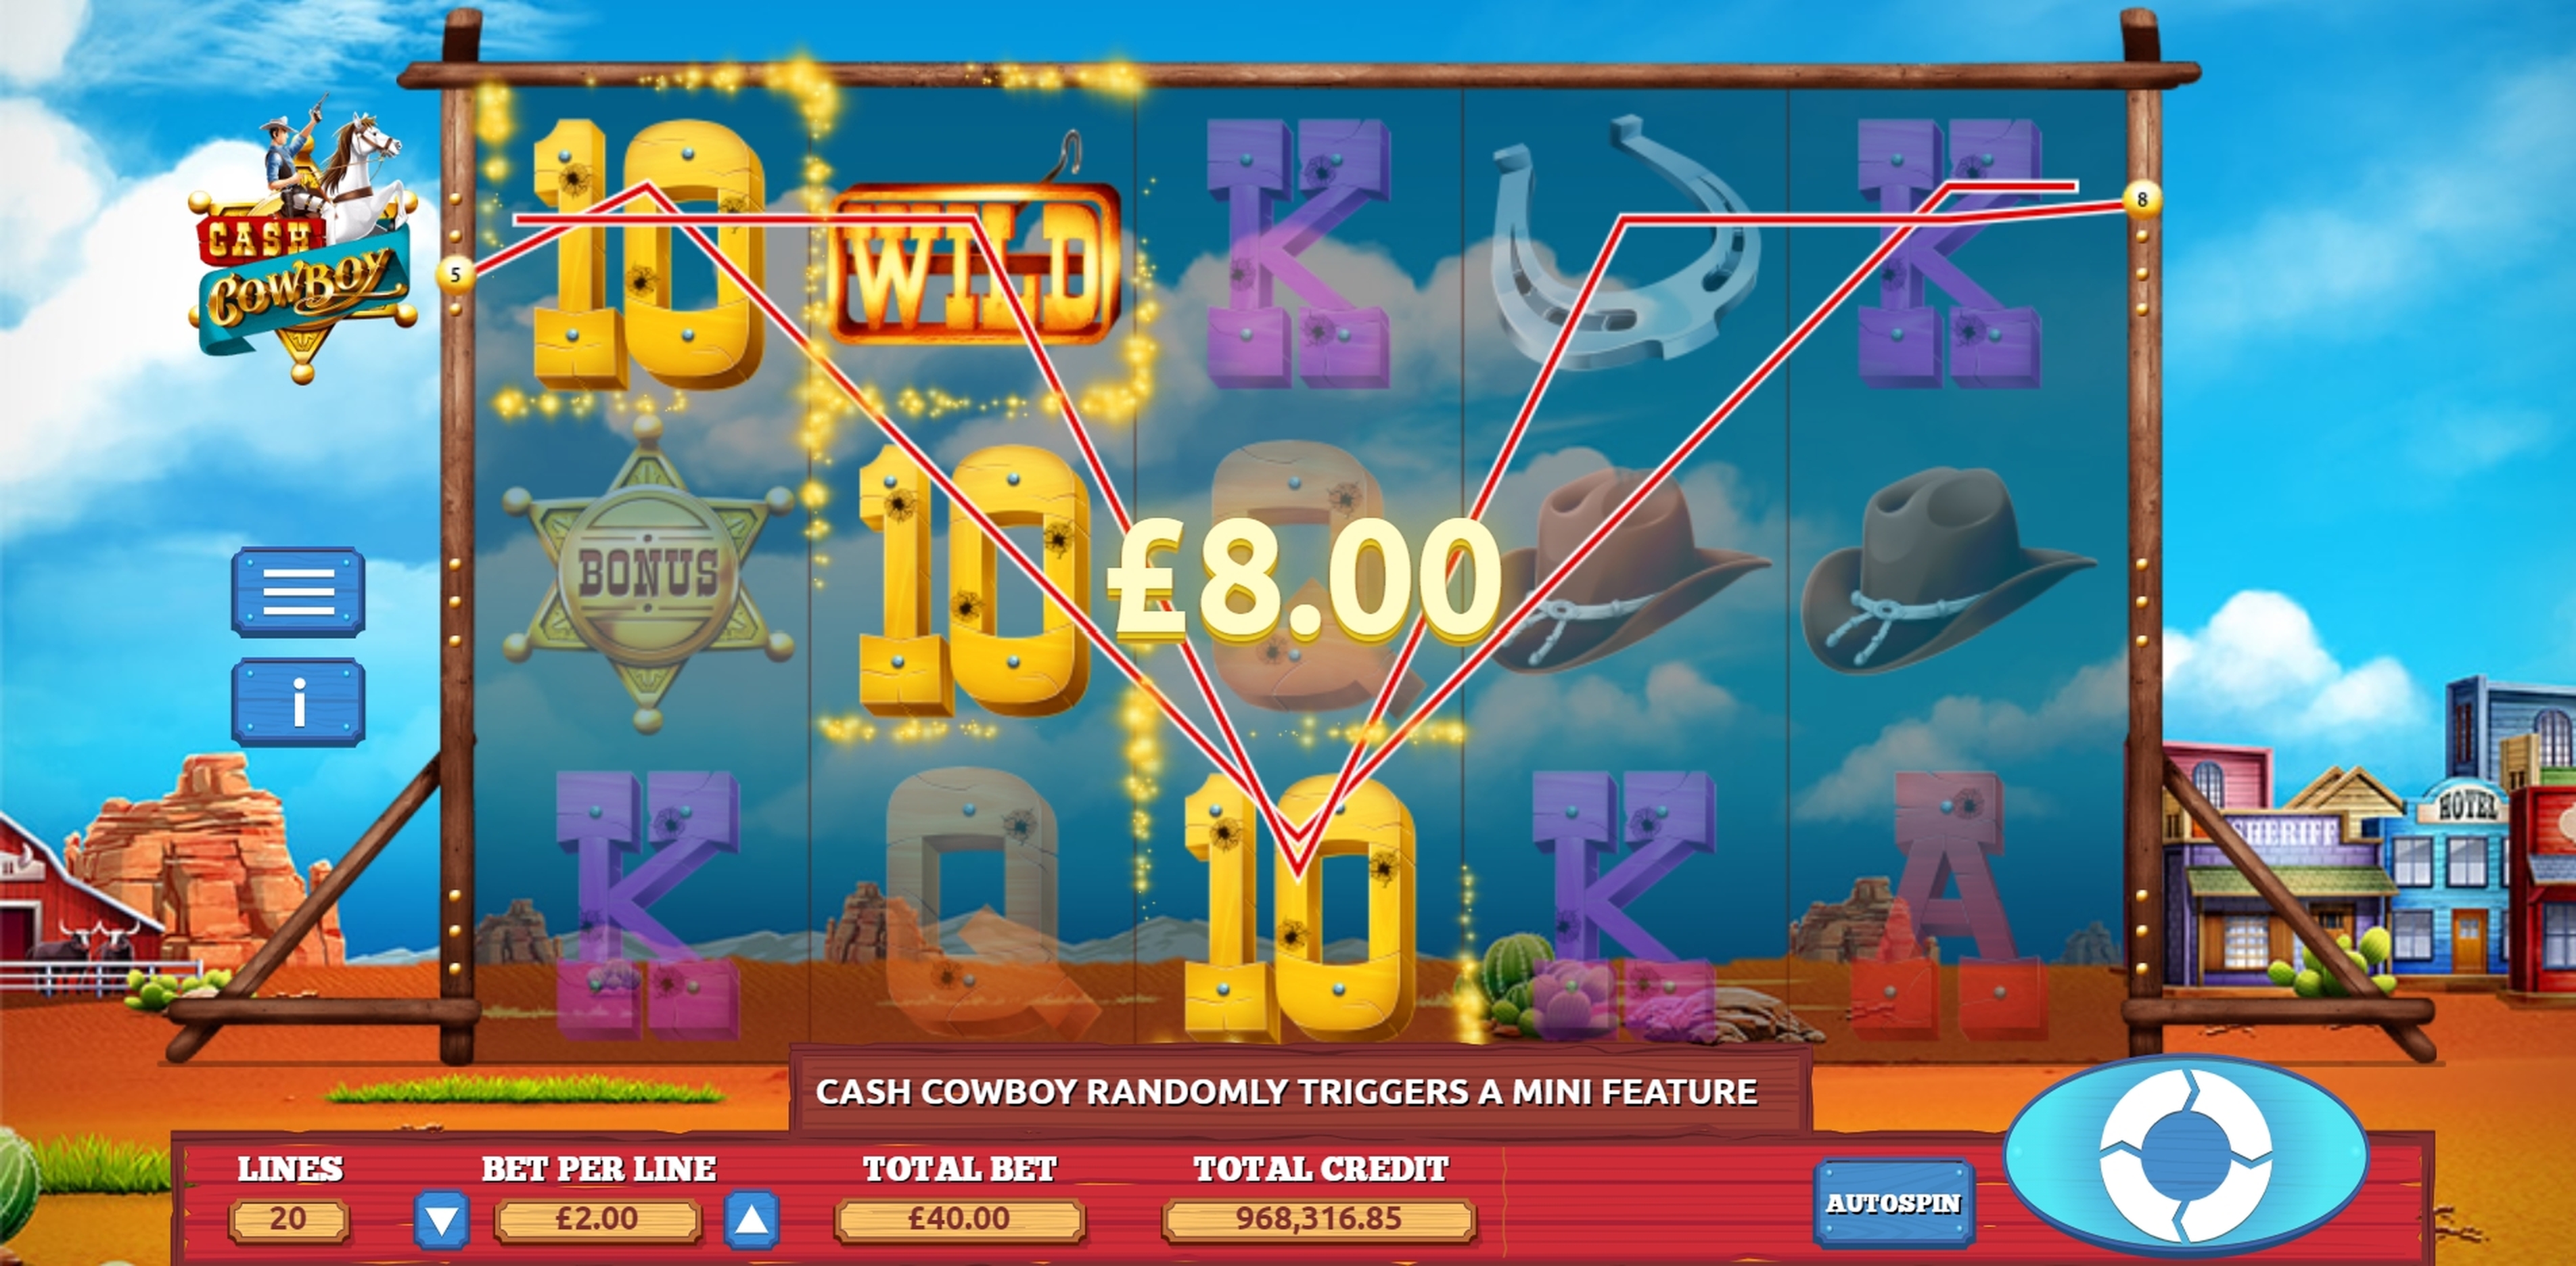 Win Money in Cash Cowboys Free Slot Game by The Games Company